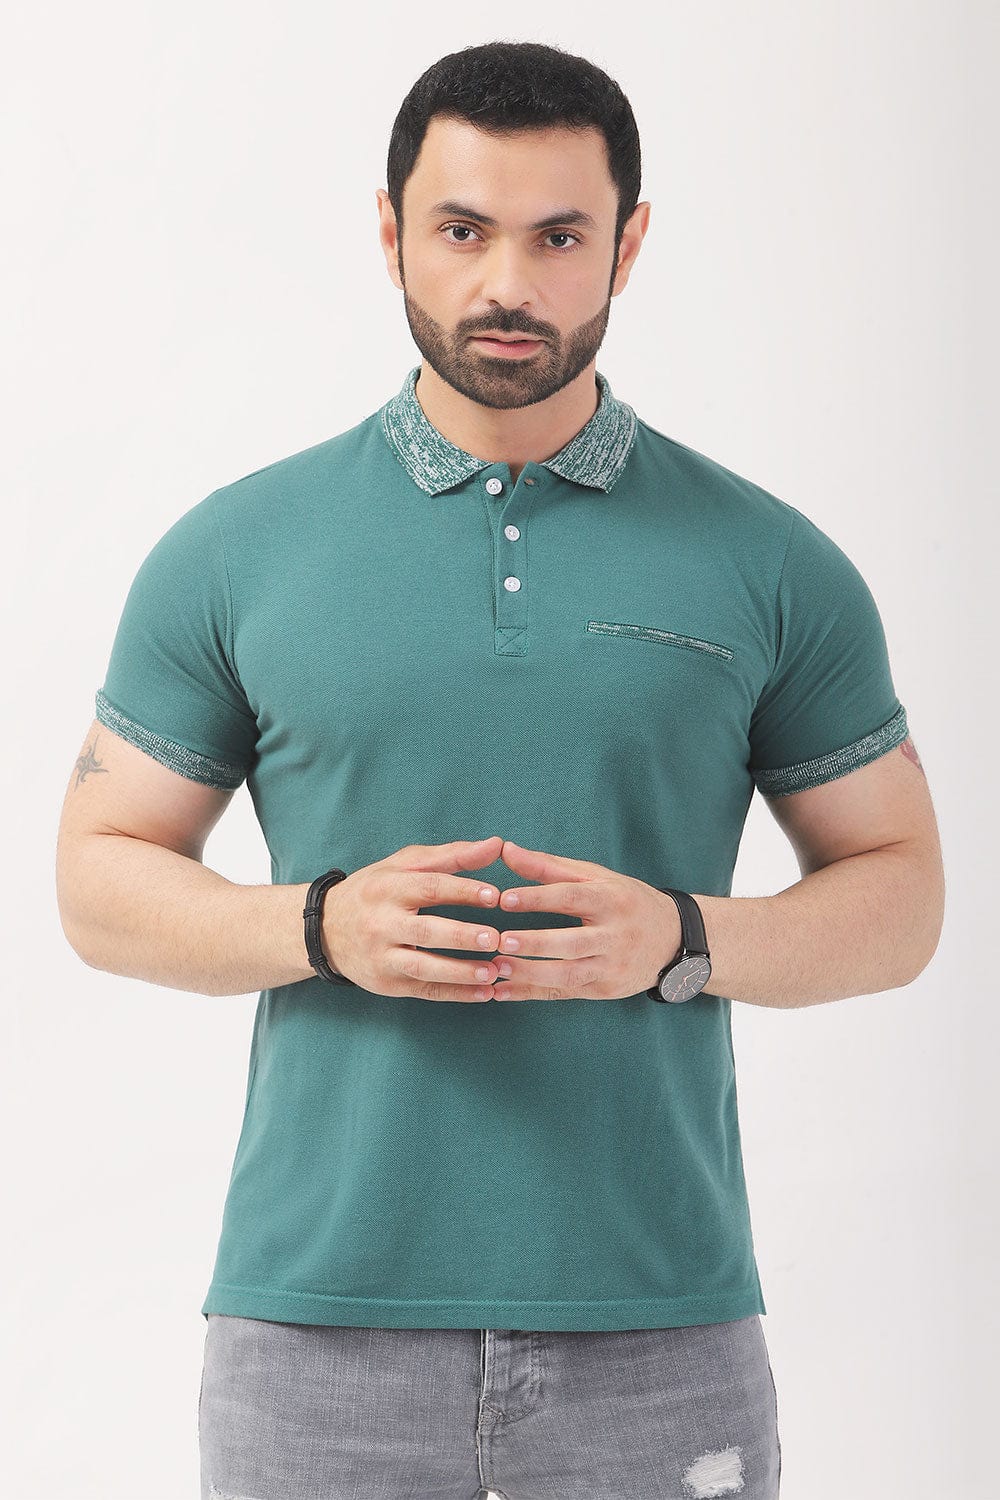 Hope Not Out by Shahid Afridi Men Polo Shirt Fashion Polo with Contrast Collar and Rib